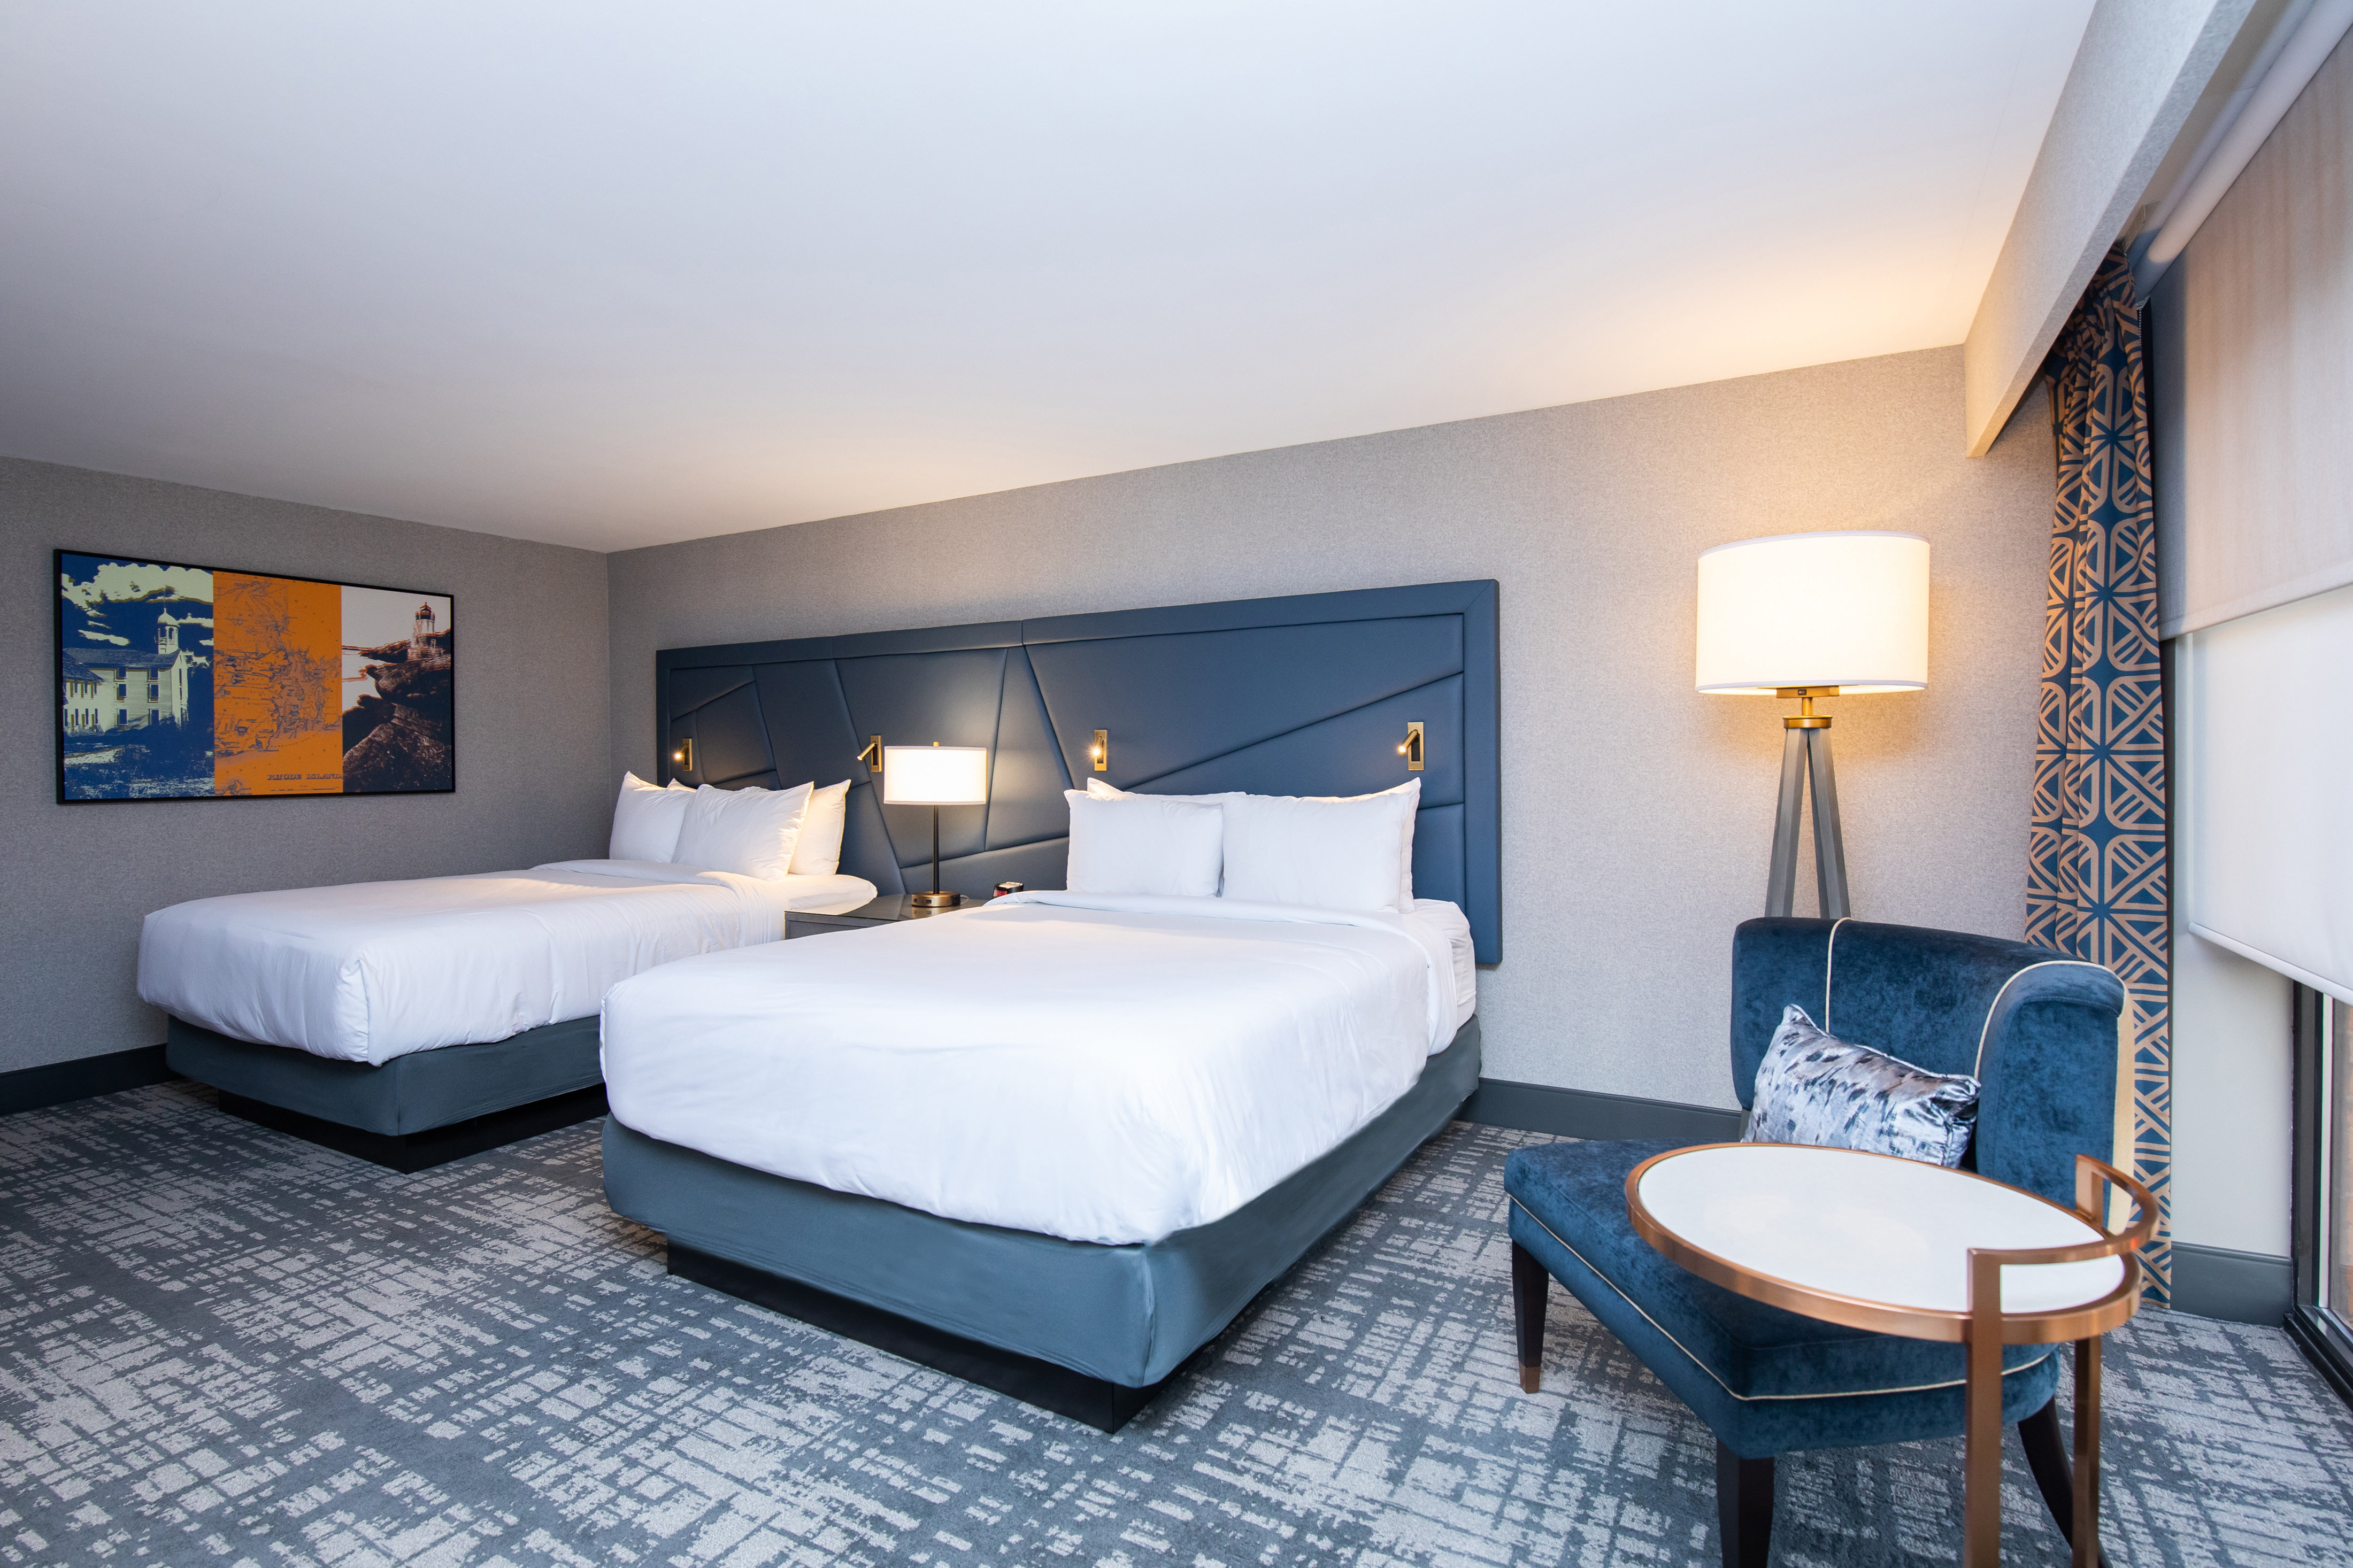 Better sleep starts with our two queen-sized beds.